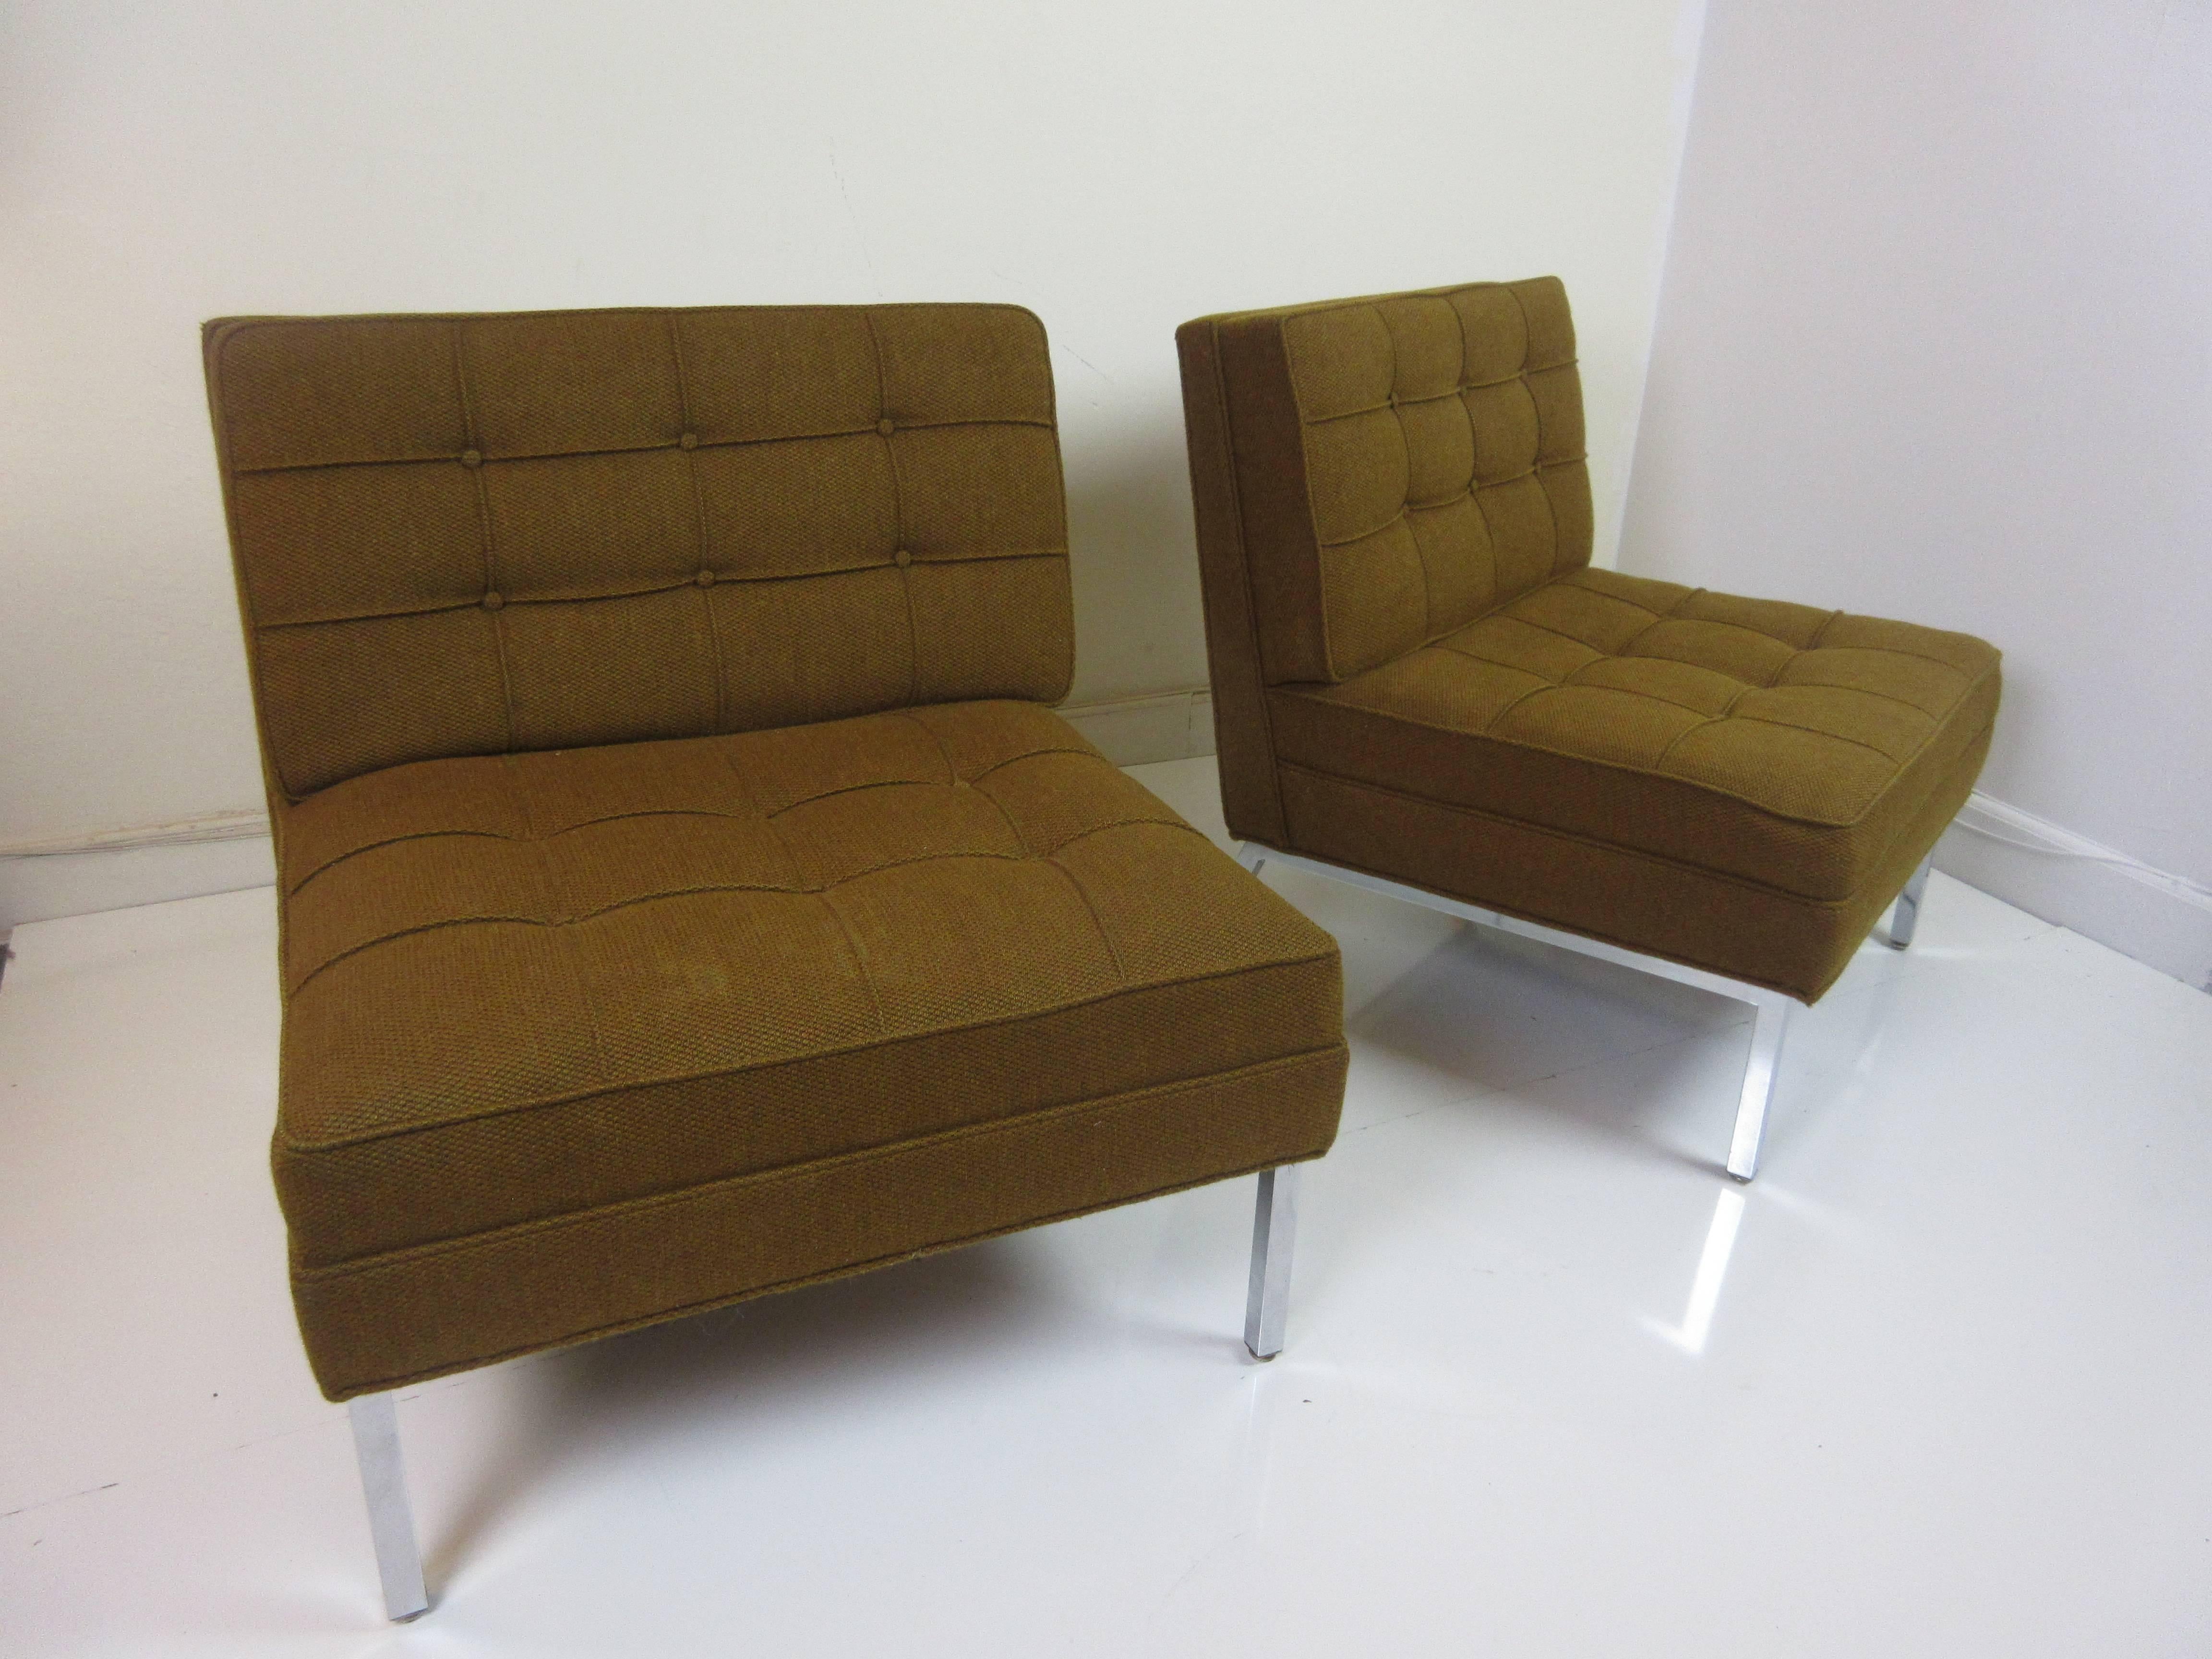 A pair of slipper chairs by Steelcase in the manner of Florence Knoll, 1970s vintage with their original yellow brown upholstery. Very nice condition, shows no wear and all foam in good shape.